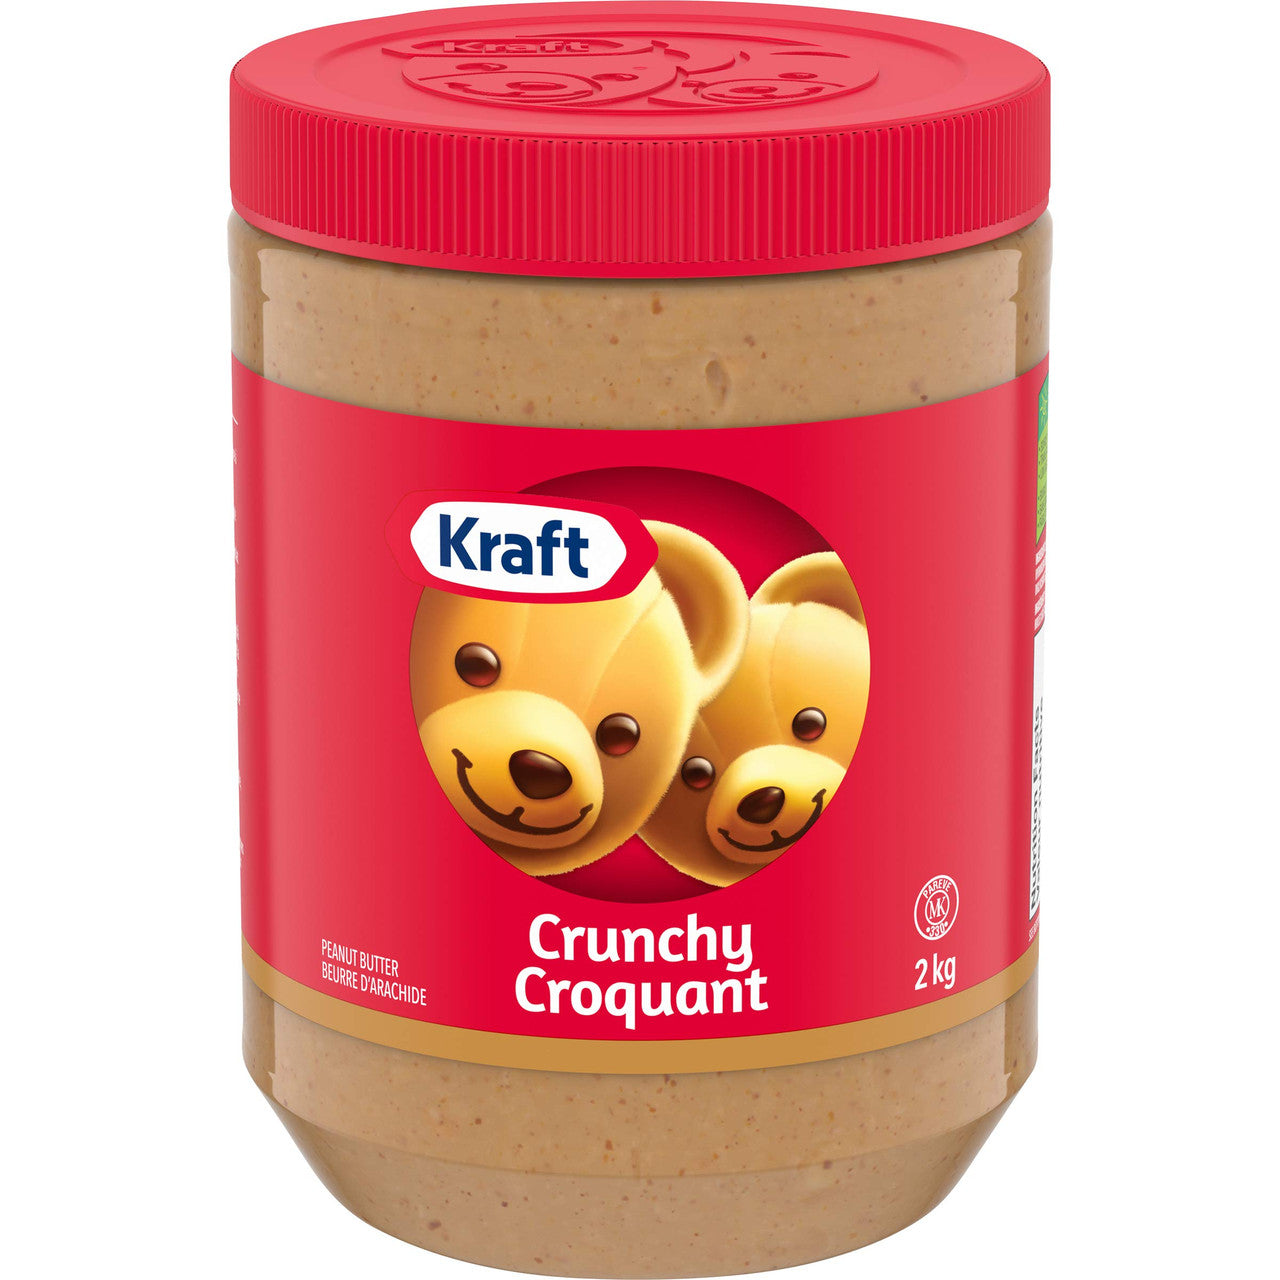 Kraft Peanut Butter, Crunchy, 2kg/4.4 lbs. Jar (Pack of 6) {Imported from Canada}